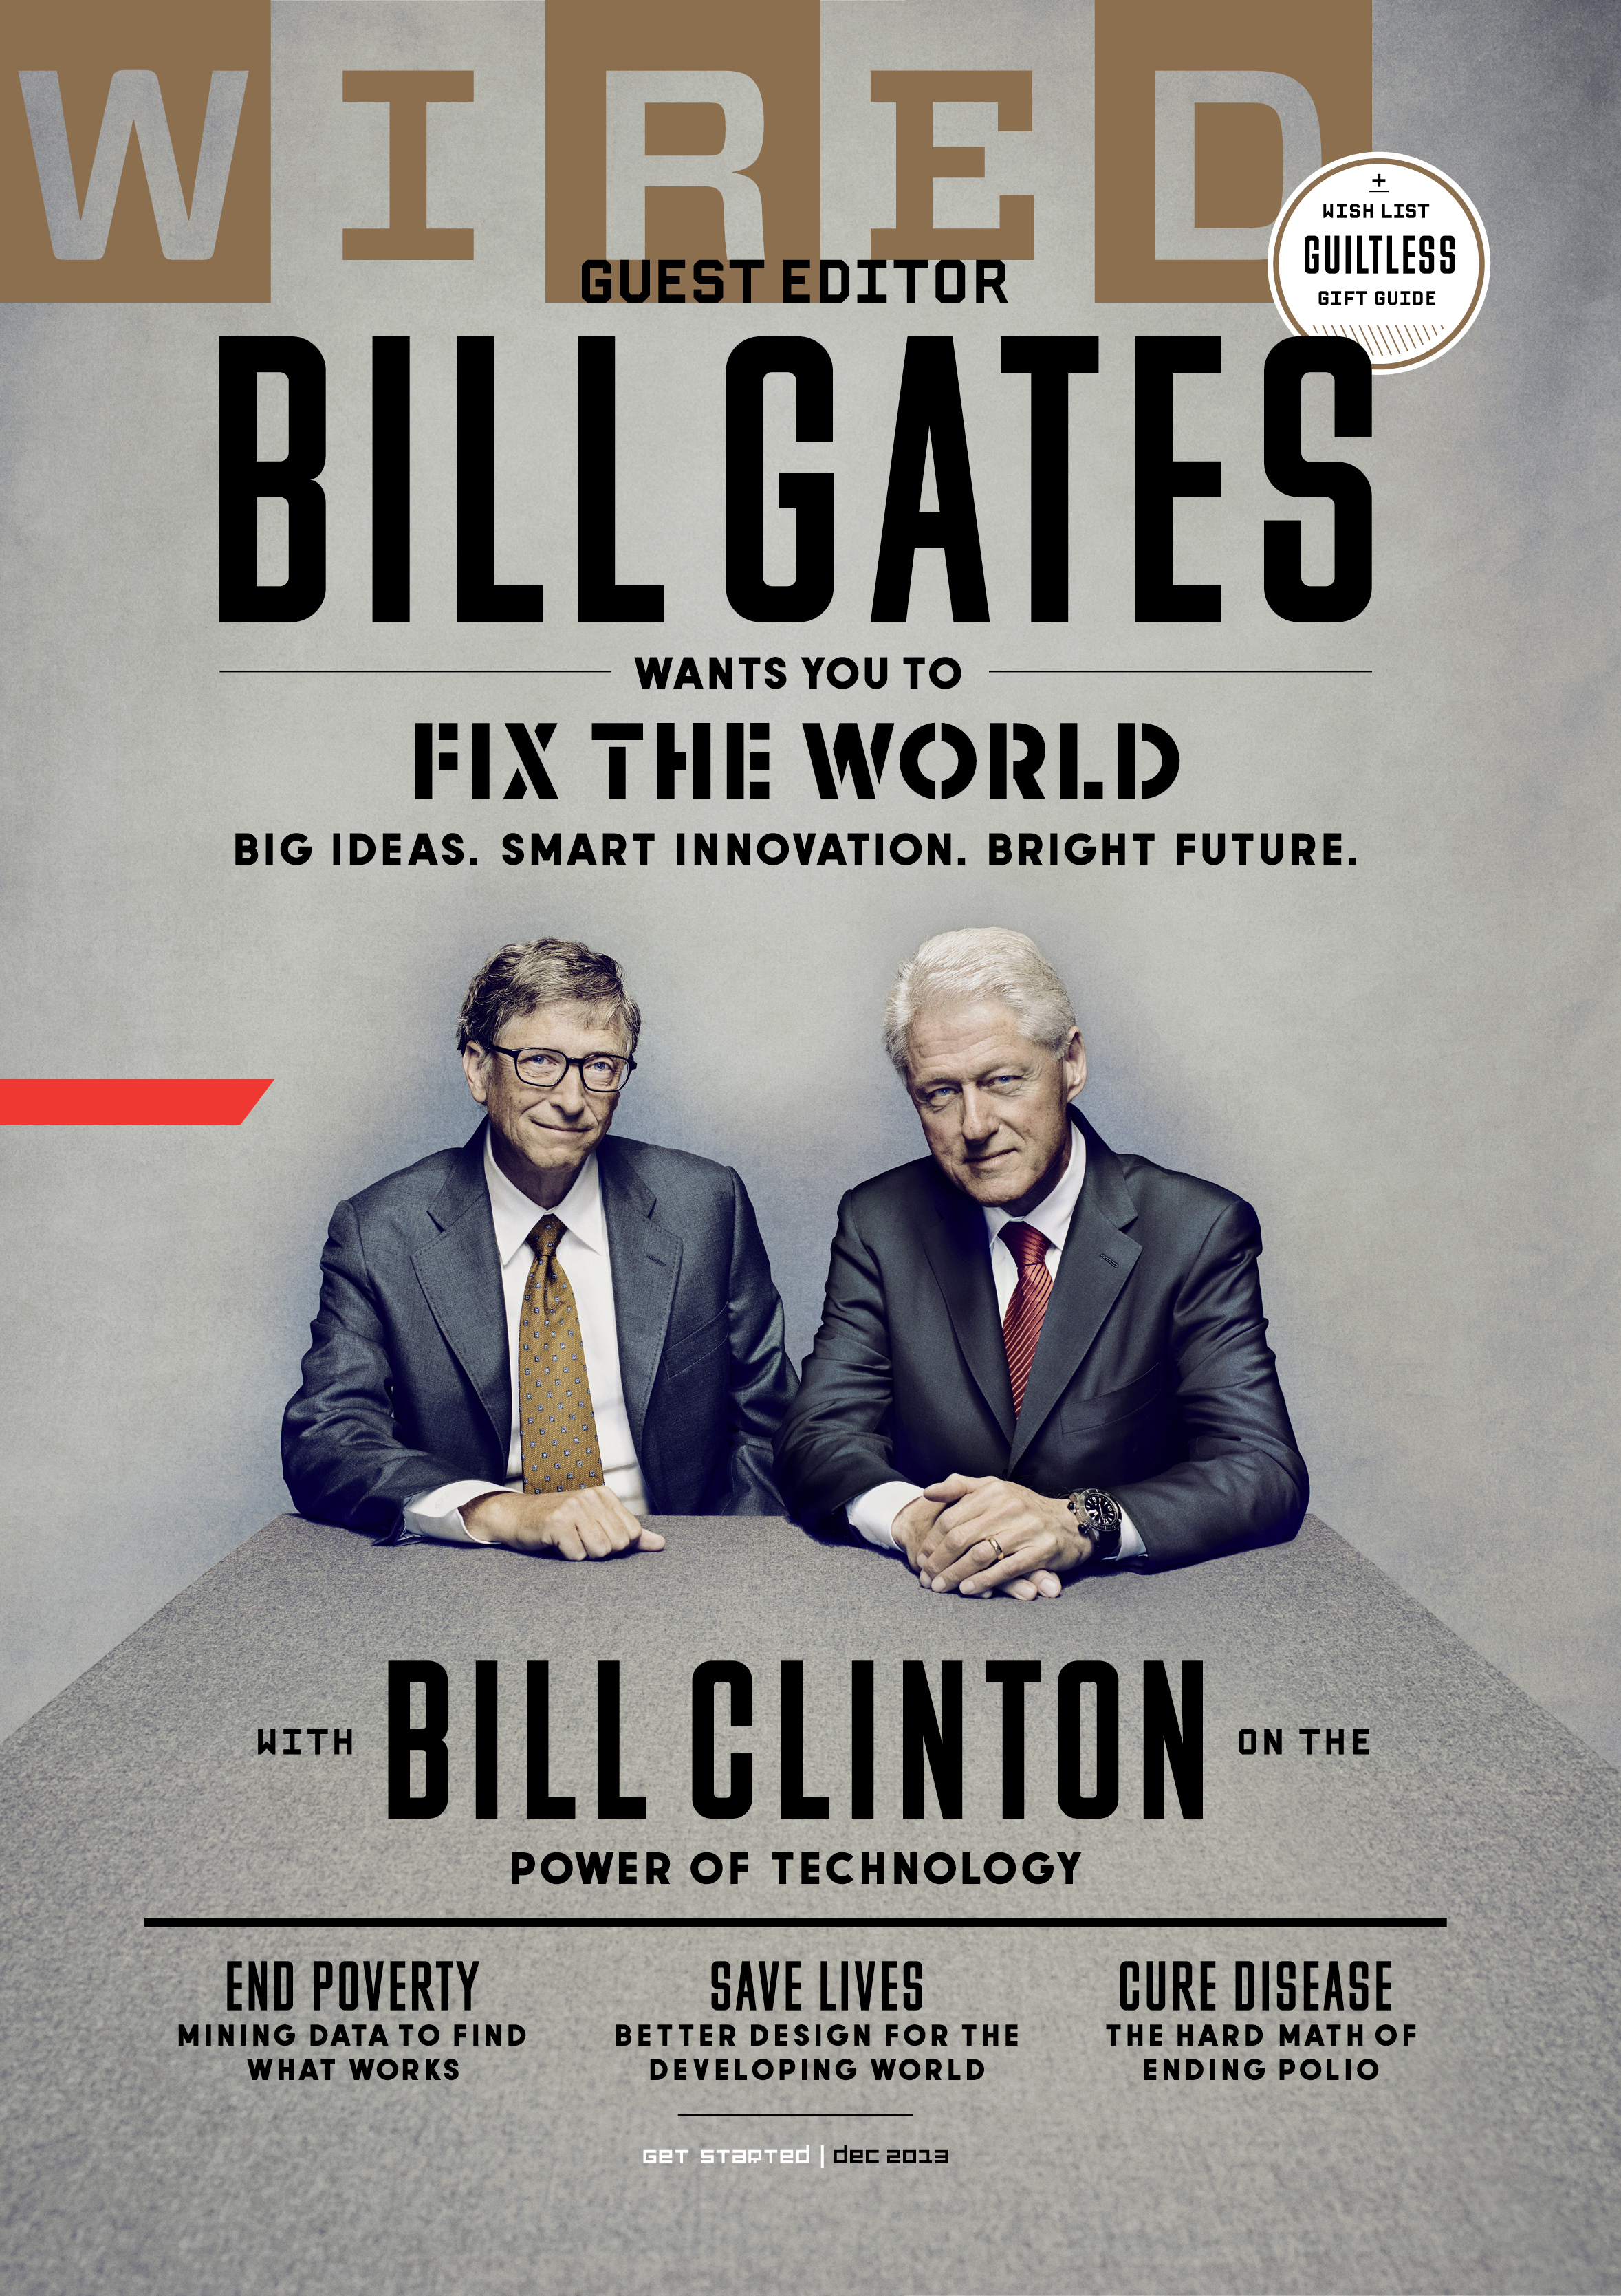 WIRED-December, "Bill Gates Wants You to Fix the World"